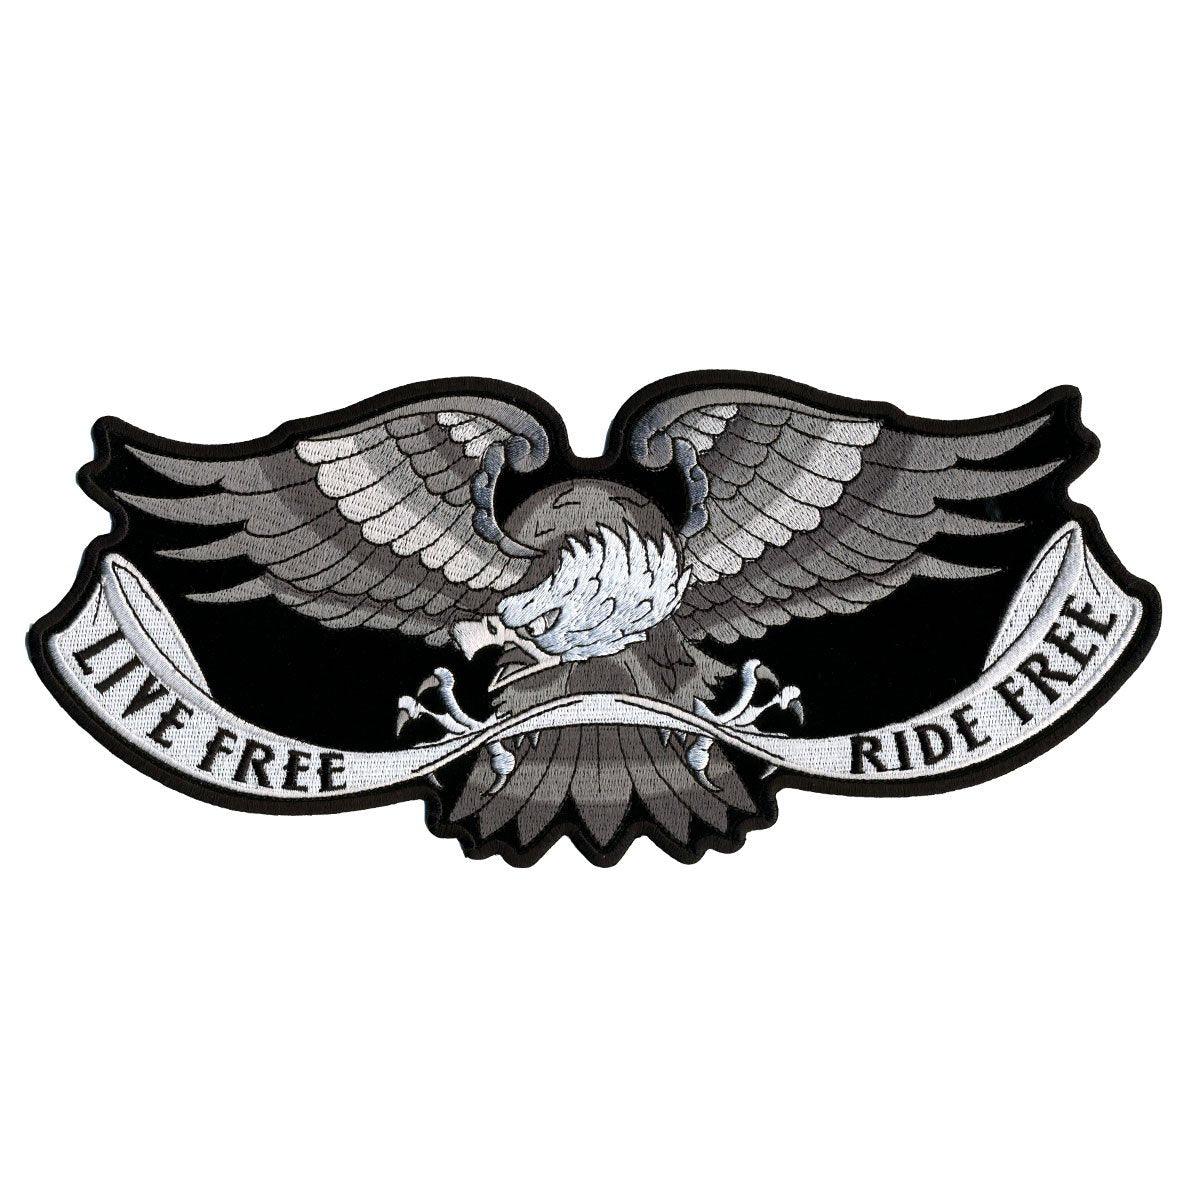 Hot Leathers Live Free Eagle 11" X 5" Patch - American Legend Rider